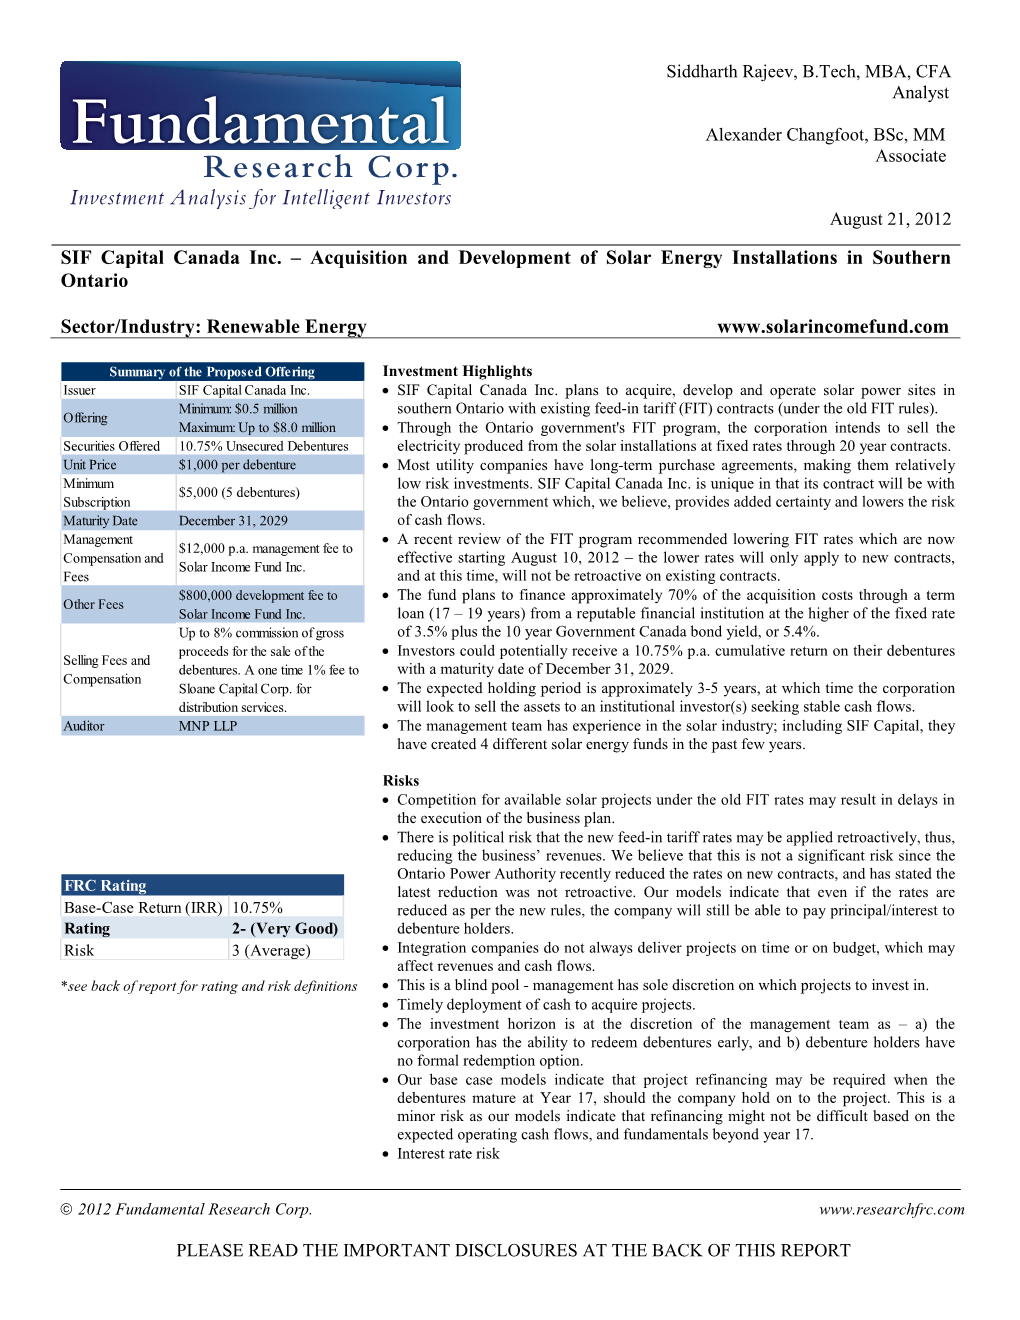 SIF Capital Canada Inc. – Acquisition and Development of Solar Energy Installations in Southern Ontario